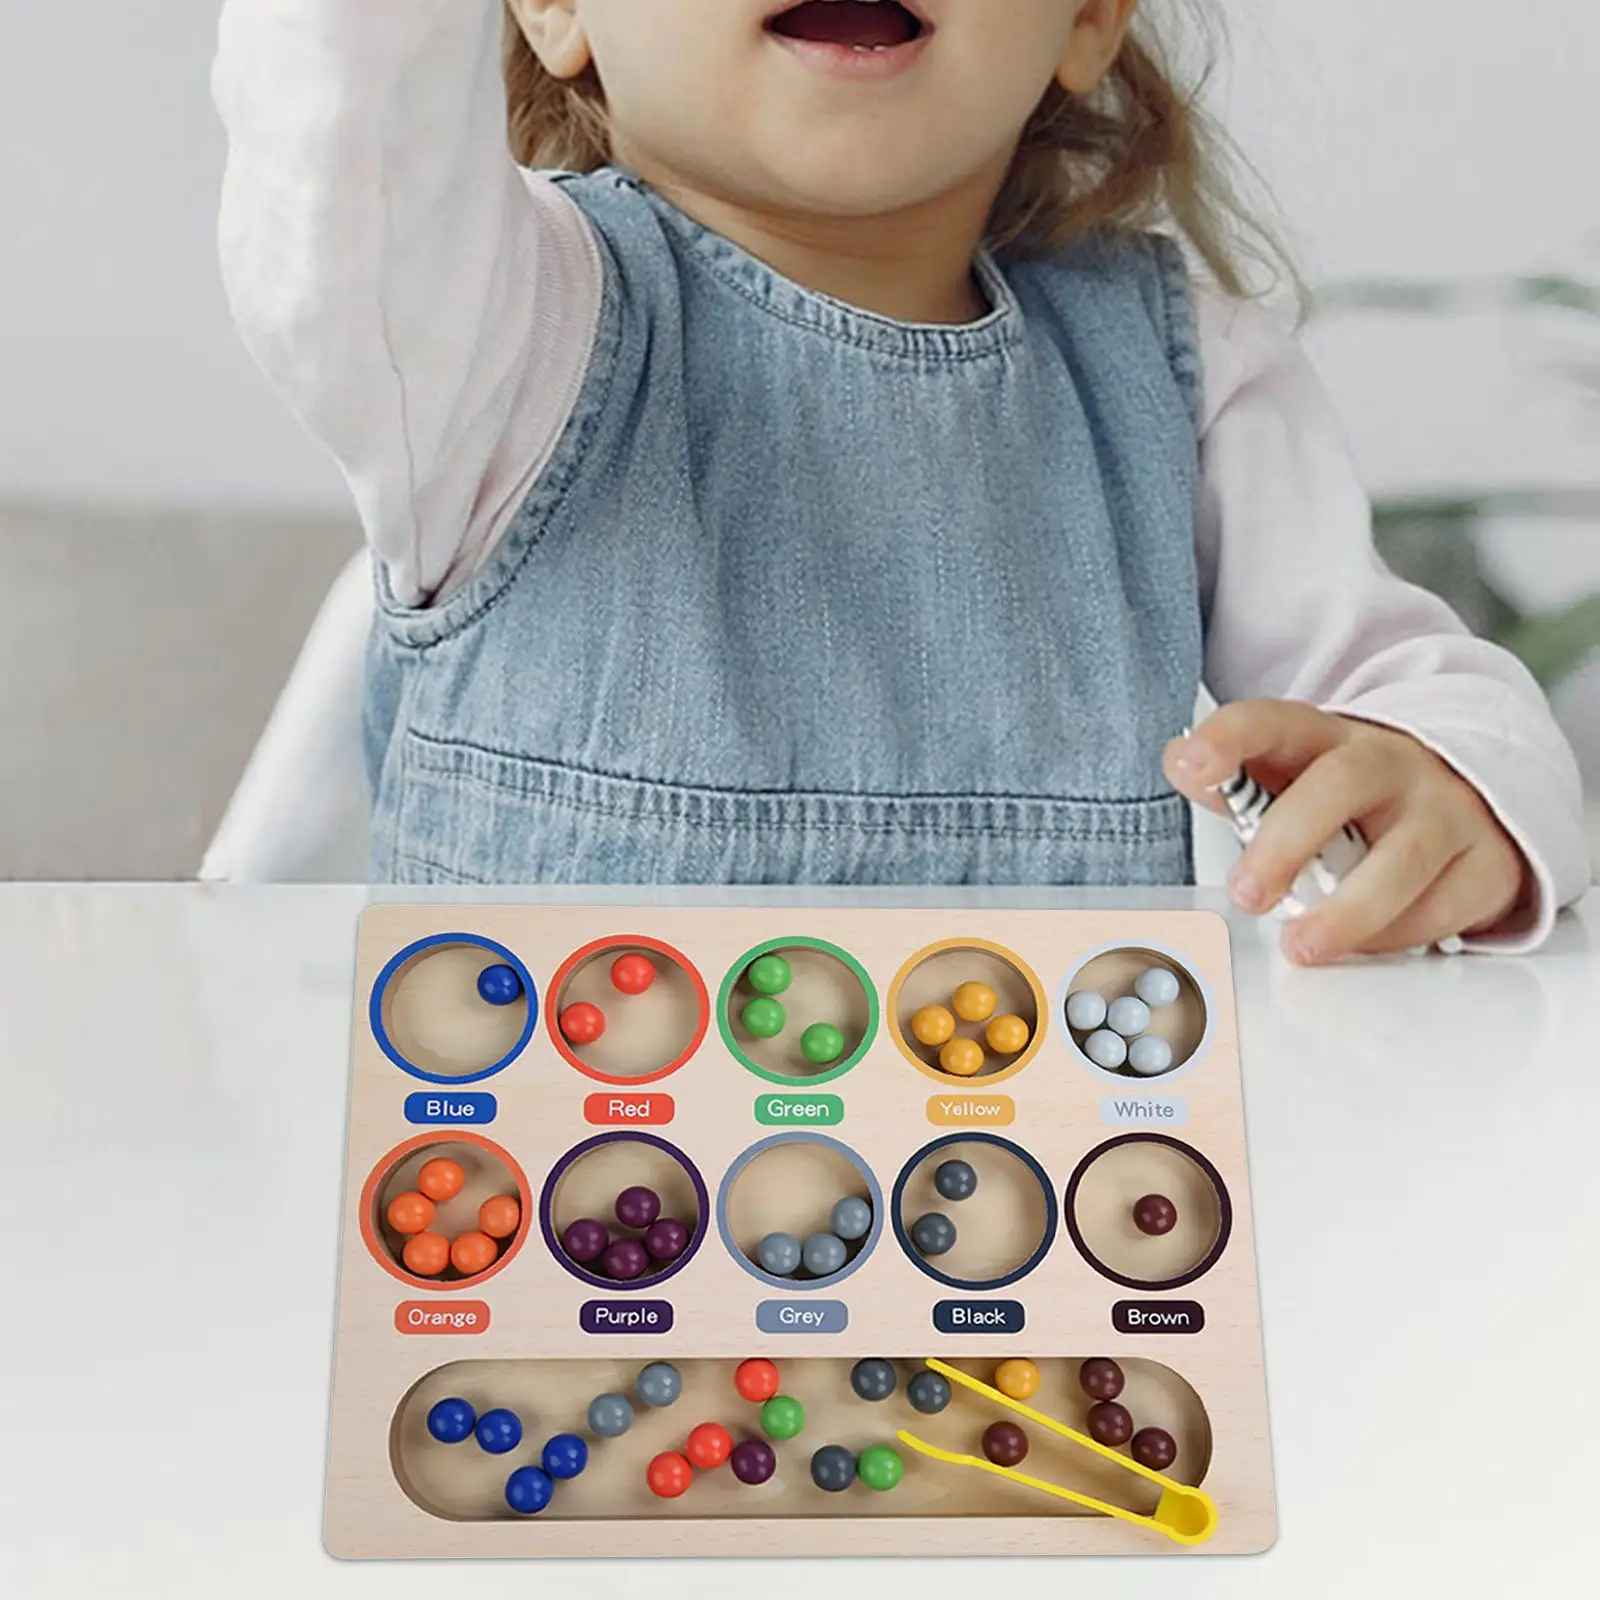 Rainbow Clip Bead Puzzle Color Sorting Game Matching Stacking Sensory Toy Wooden Rainbow Peg Board for Children Kids Toddlers